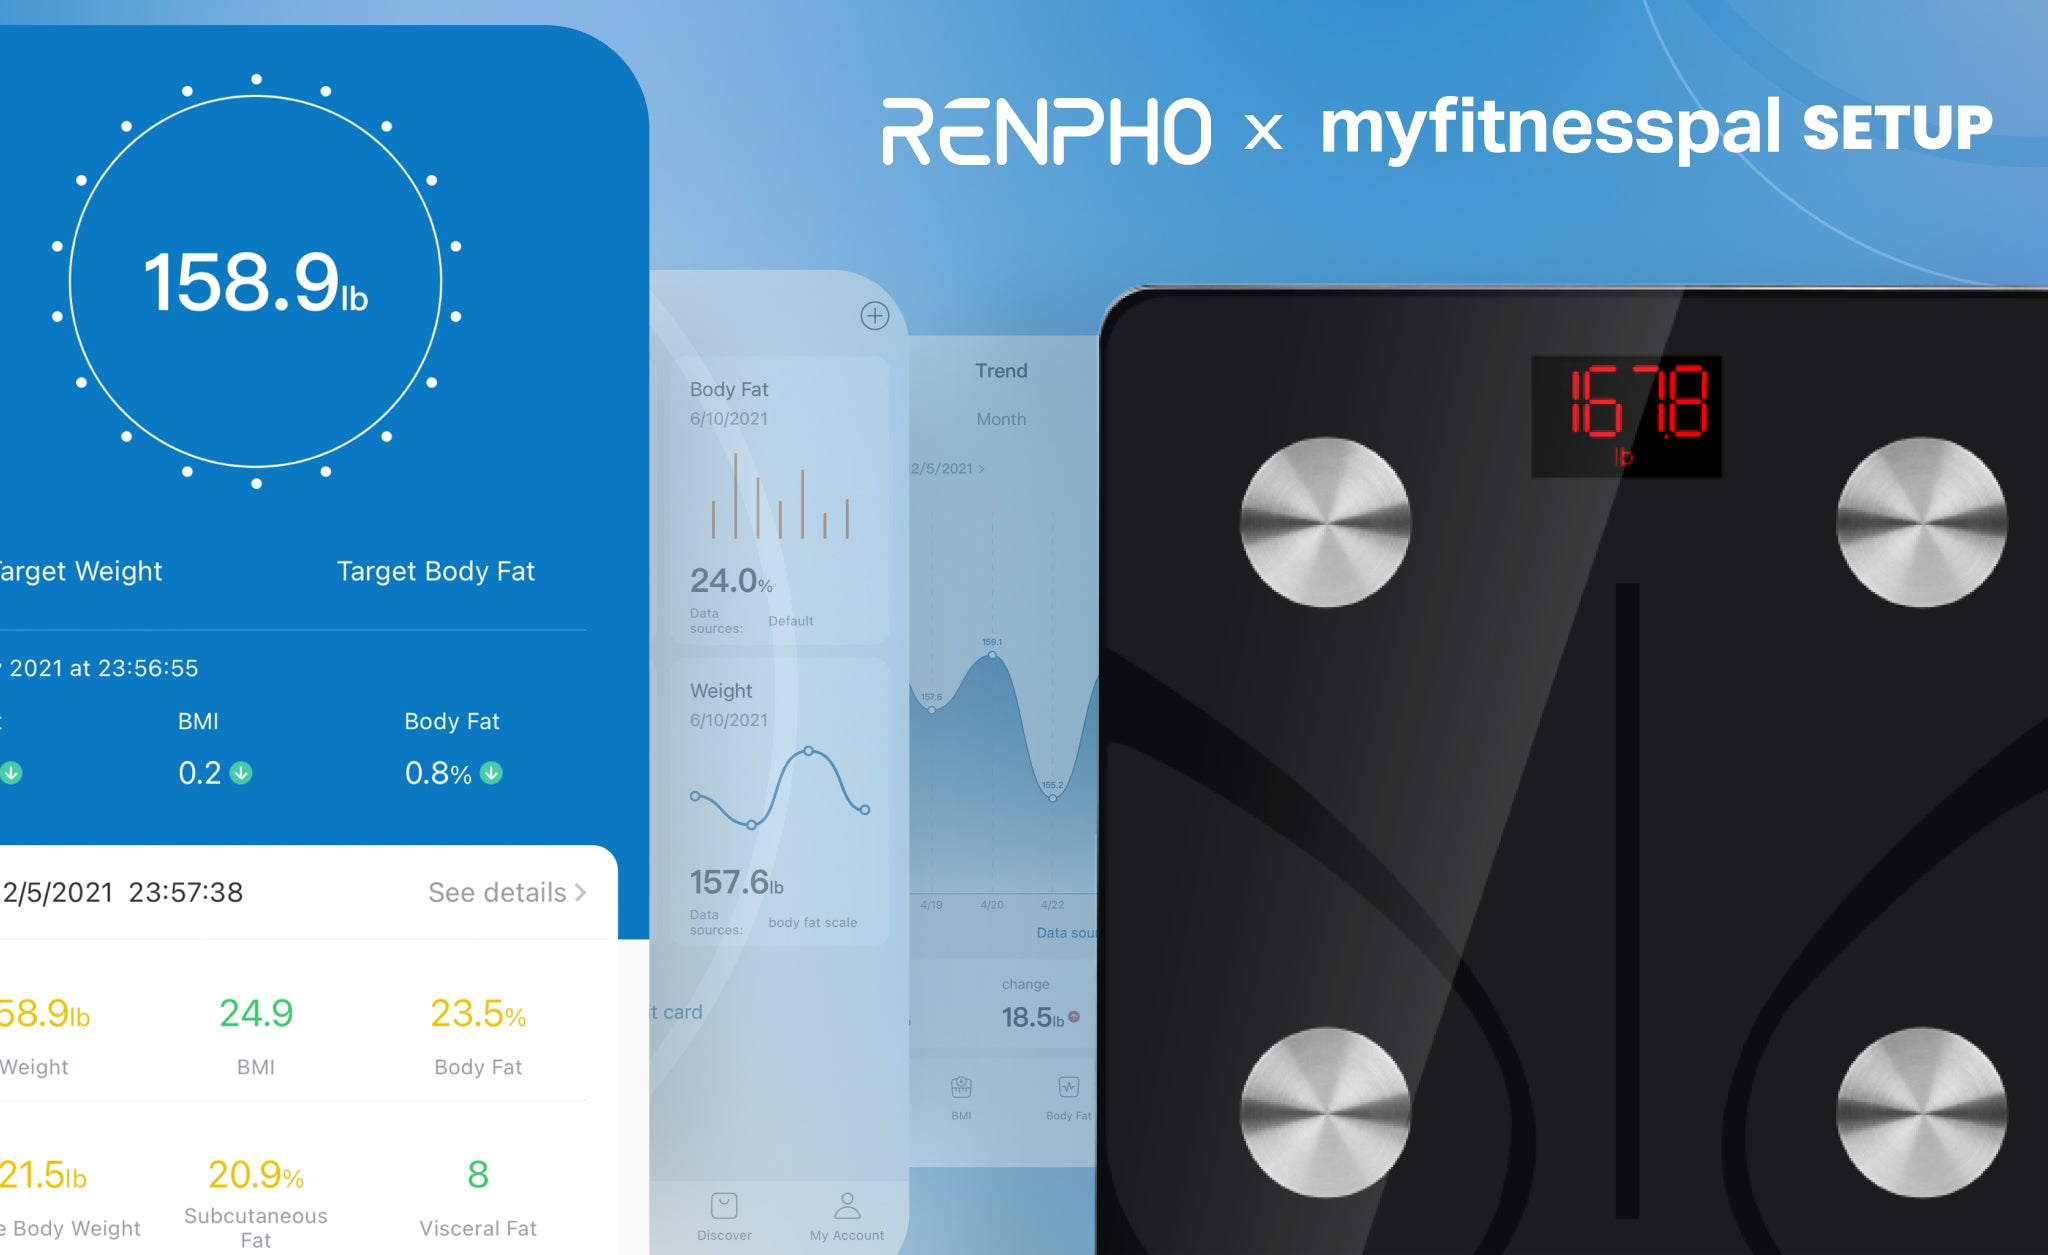 Another #RENPHOhealthhero submission! This time: RENPHO Smart Body